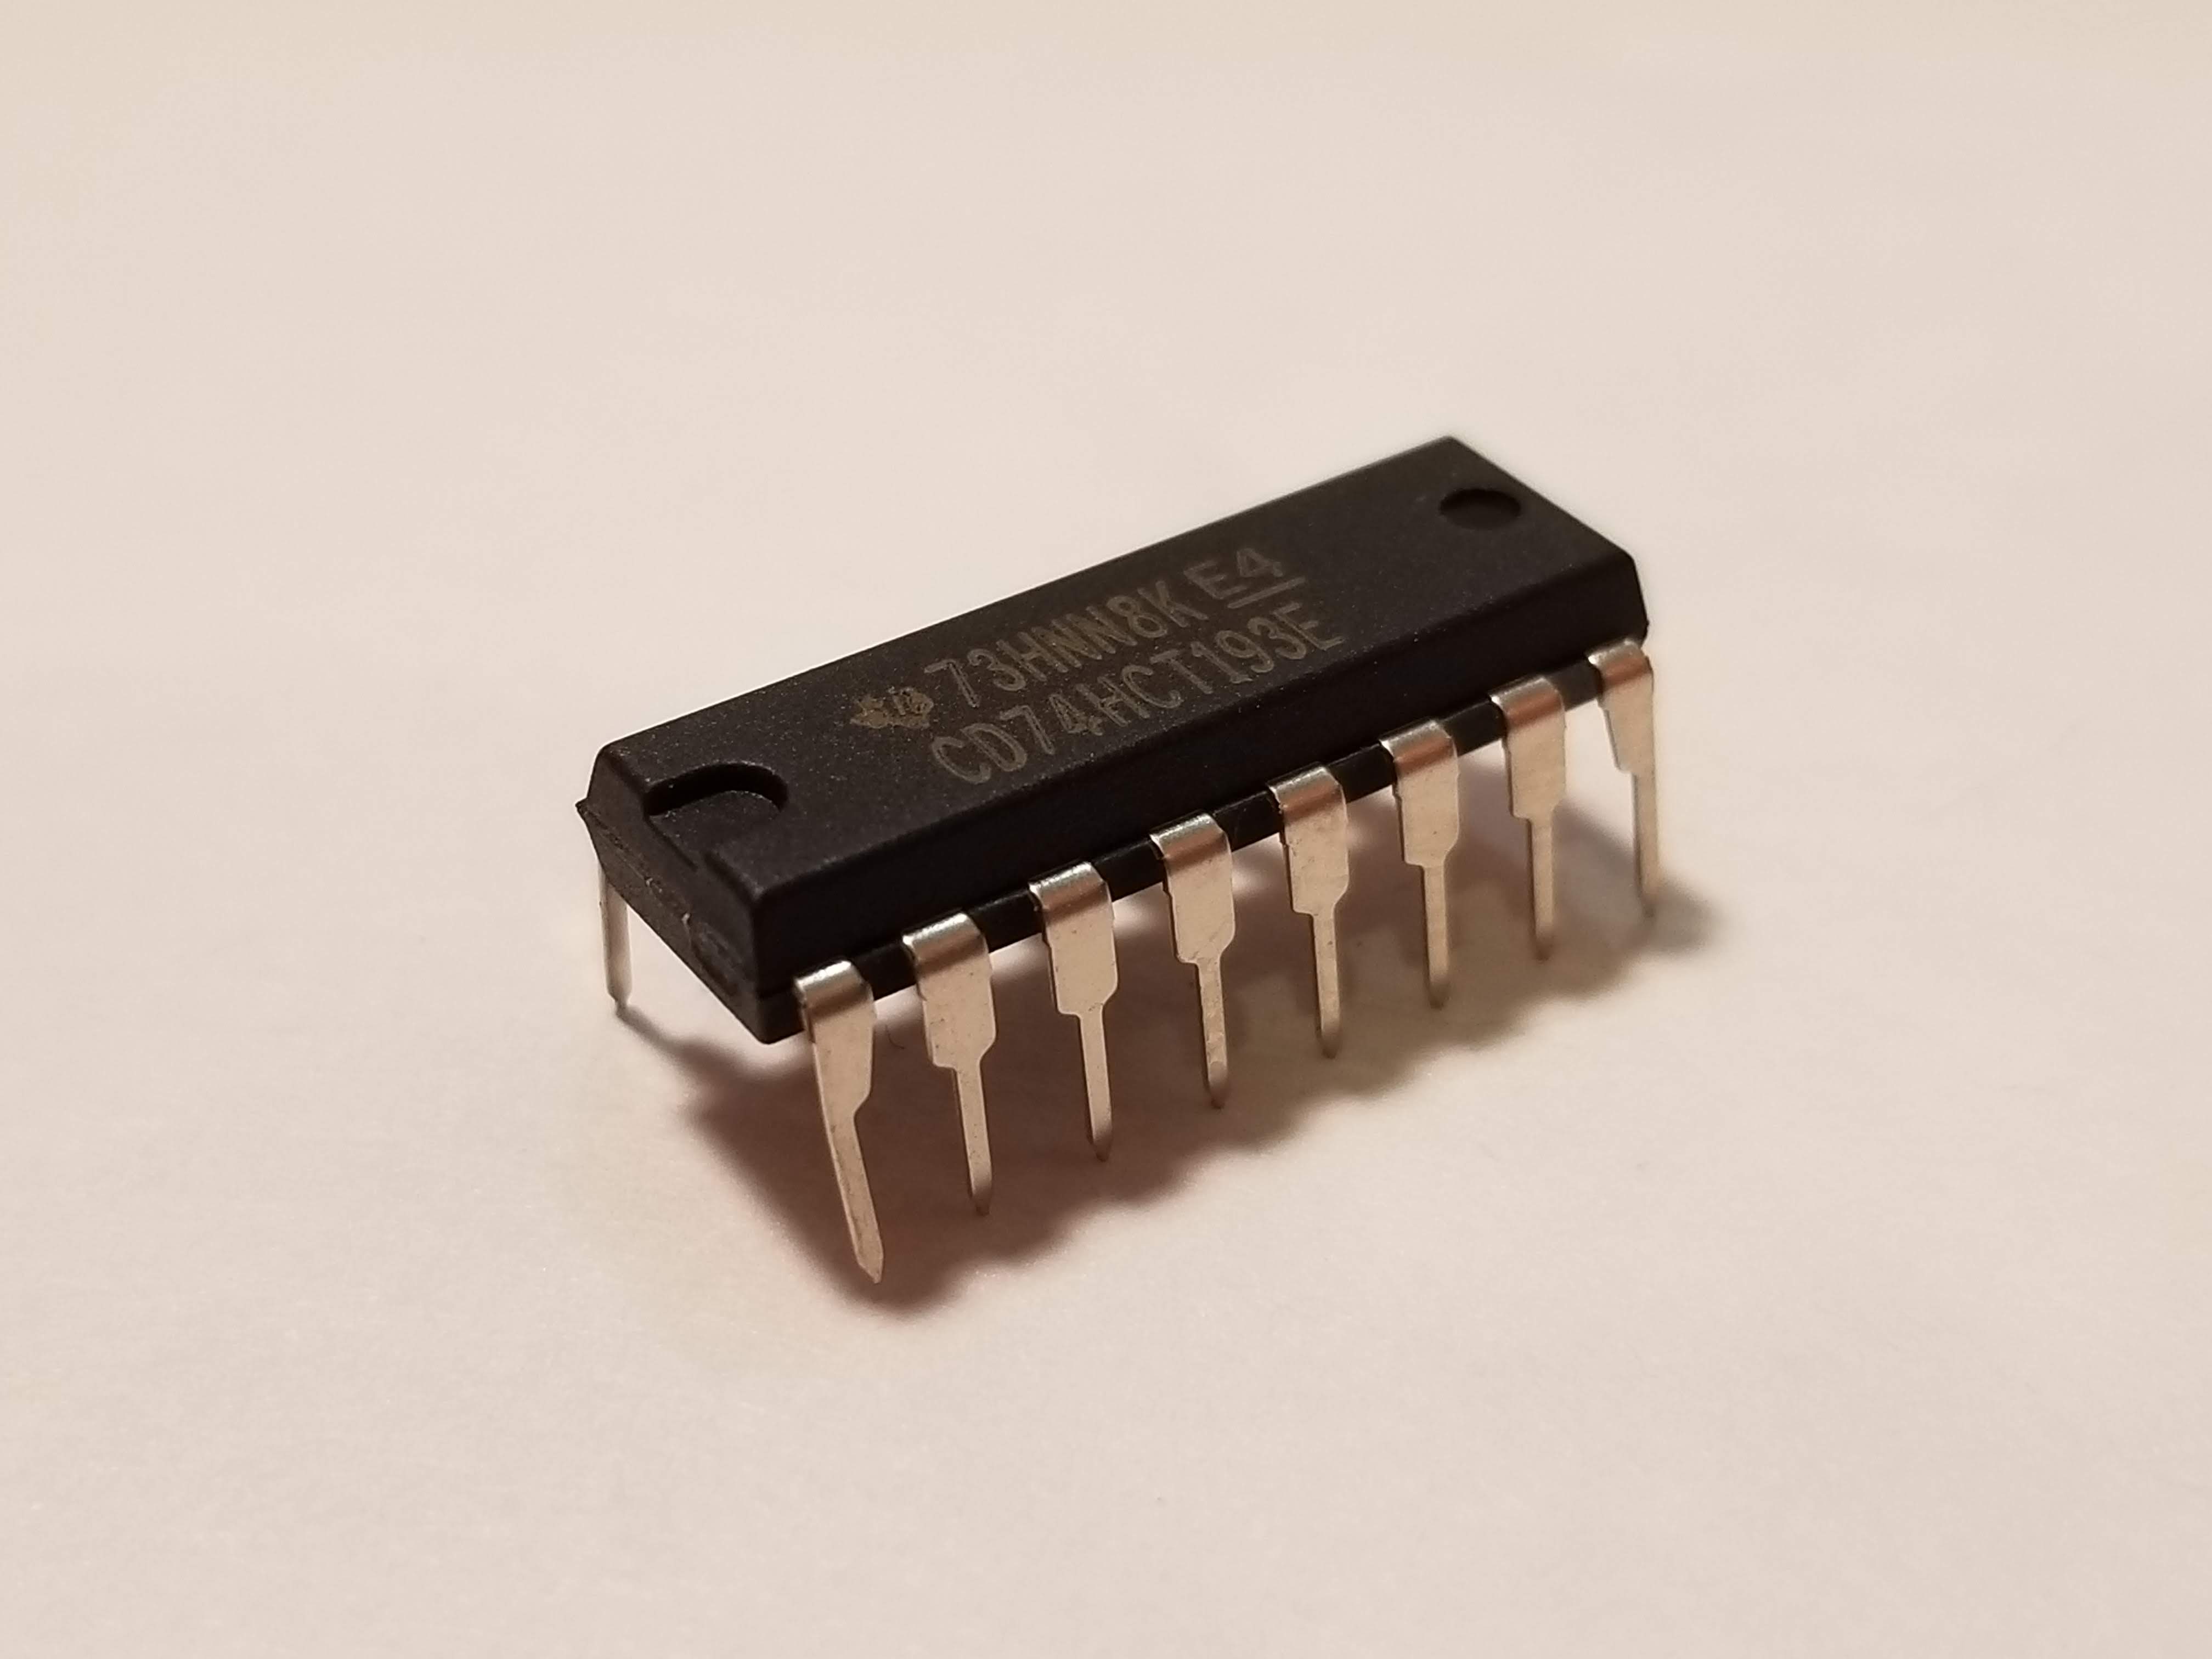 Picture of 74193 Up/Down Binary Counter